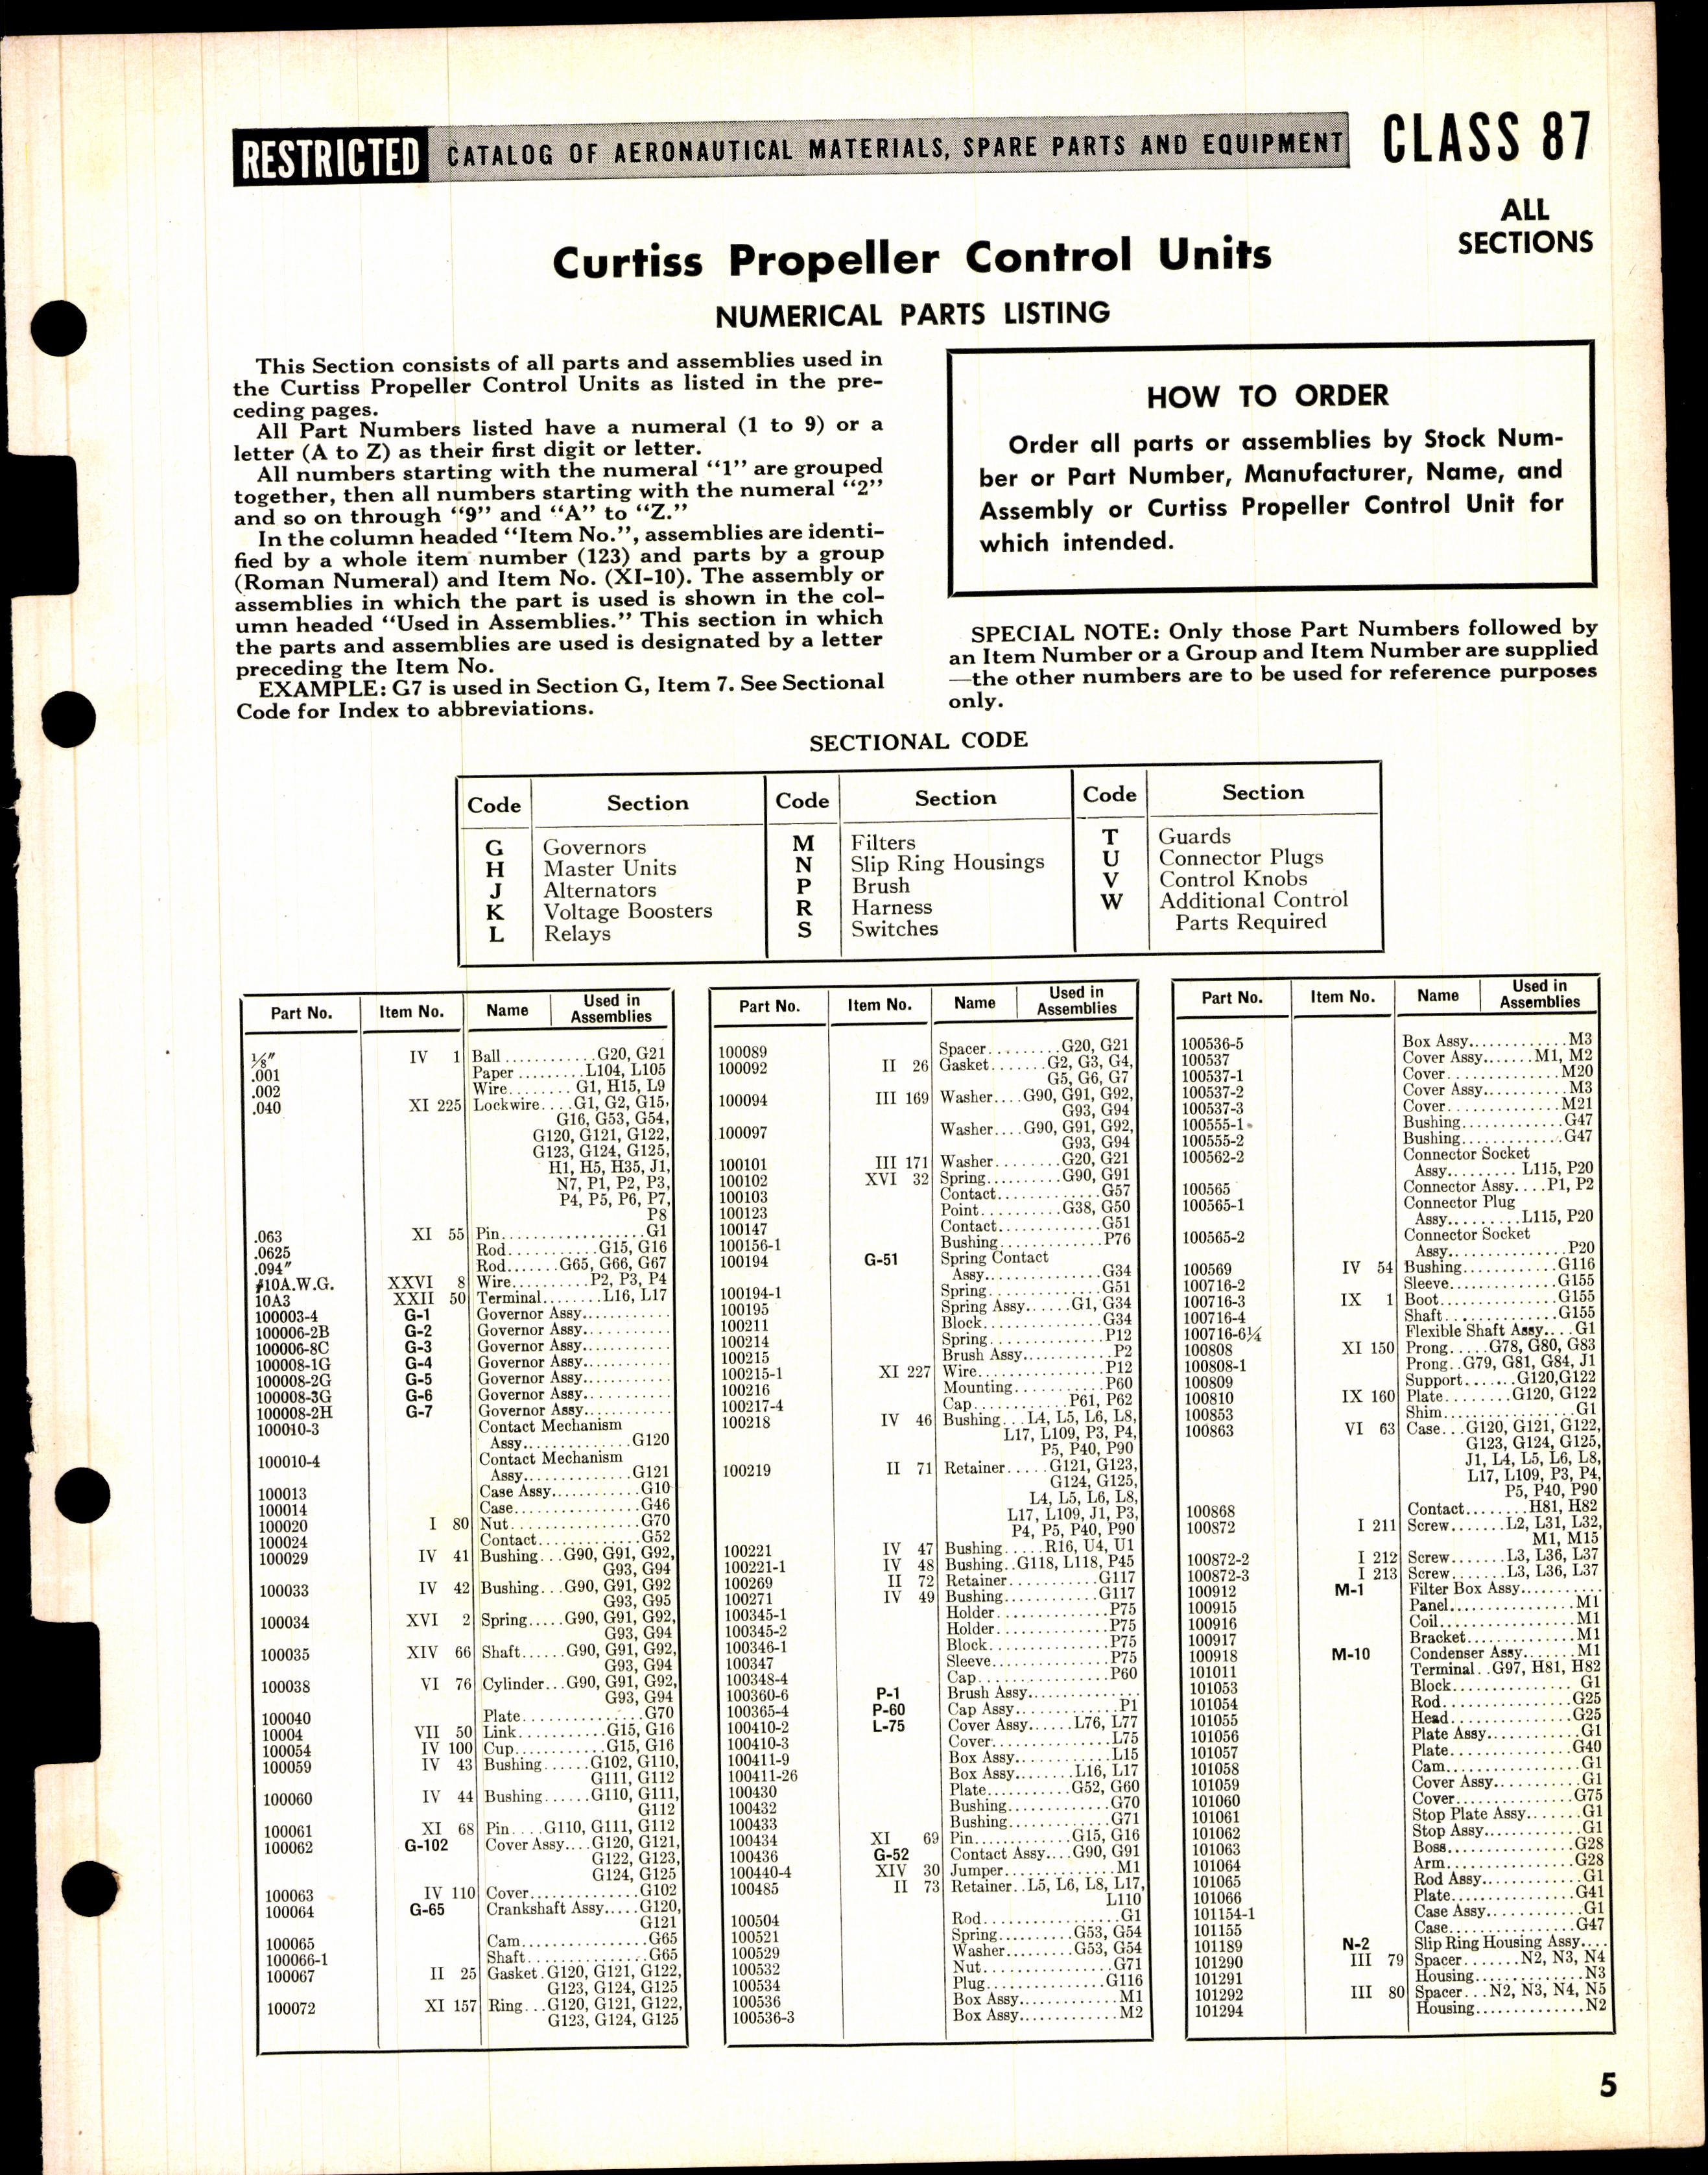 Sample page 5 from AirCorps Library document: Numerical Listing, Hamilton and Curtiss Propeller Controls